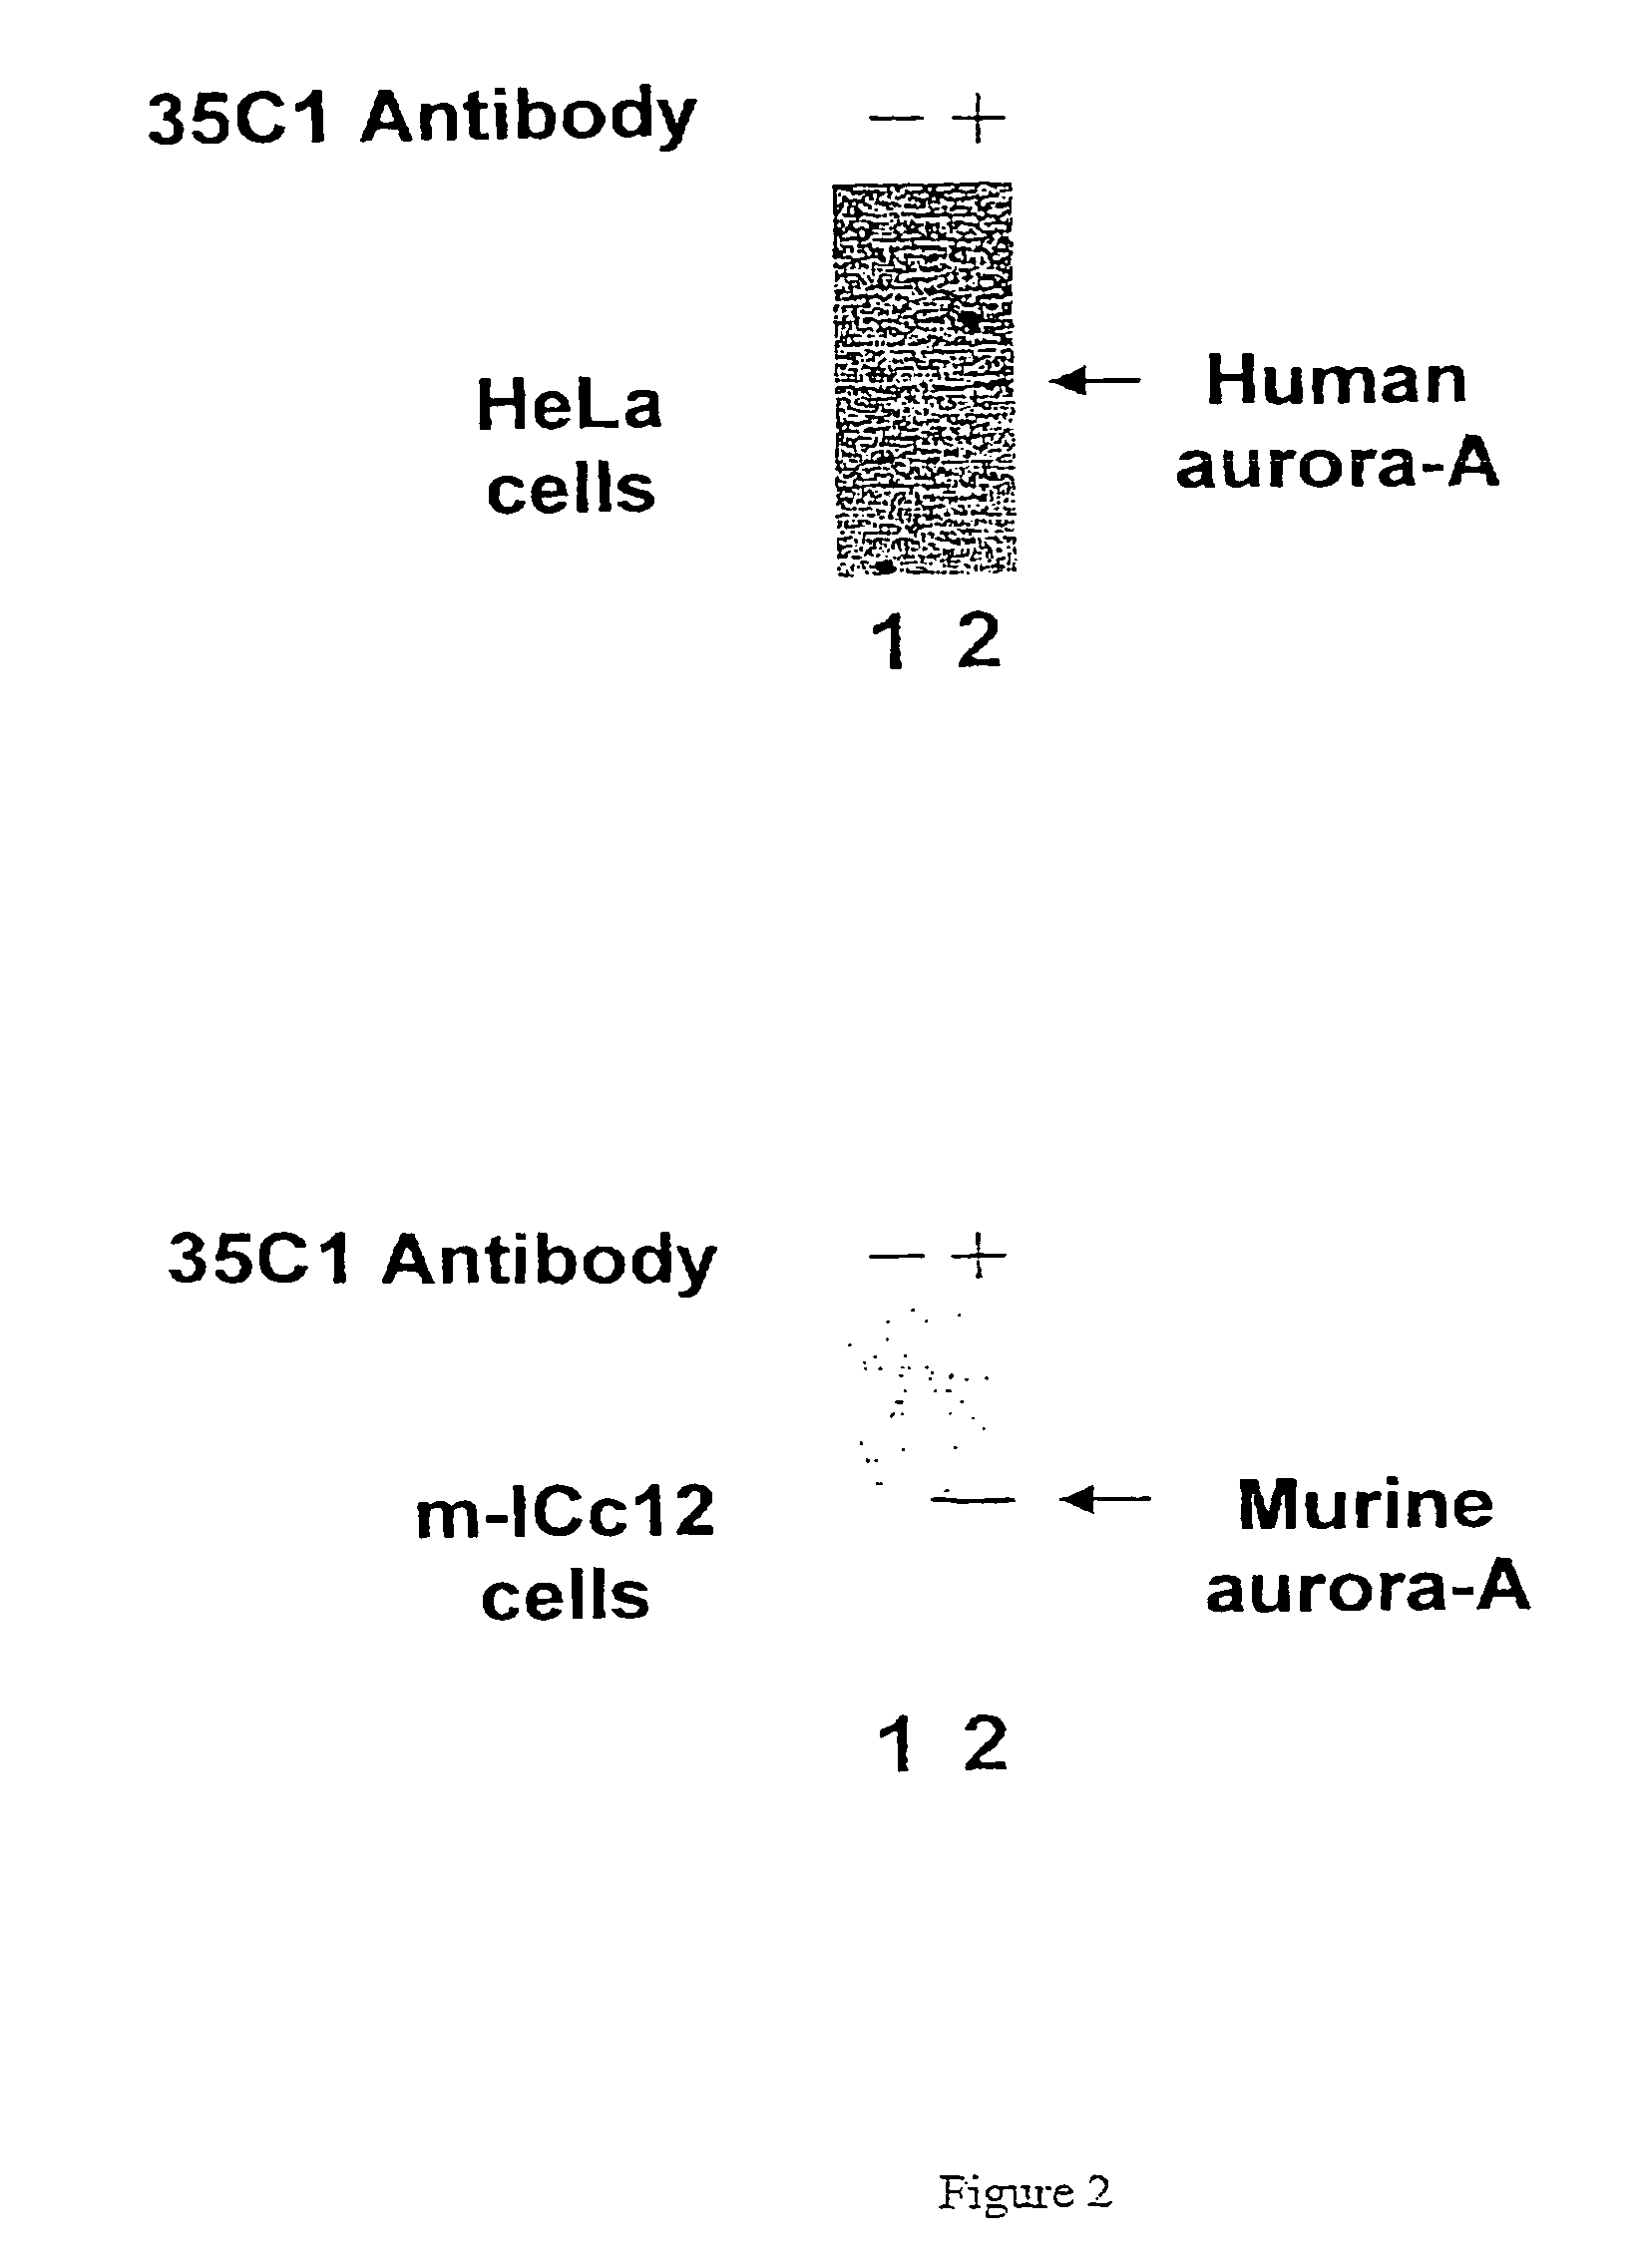 Anti-aurora-A monoclonal antibody, method for obtaining same and uses thereof for diagnosing and treating cancers